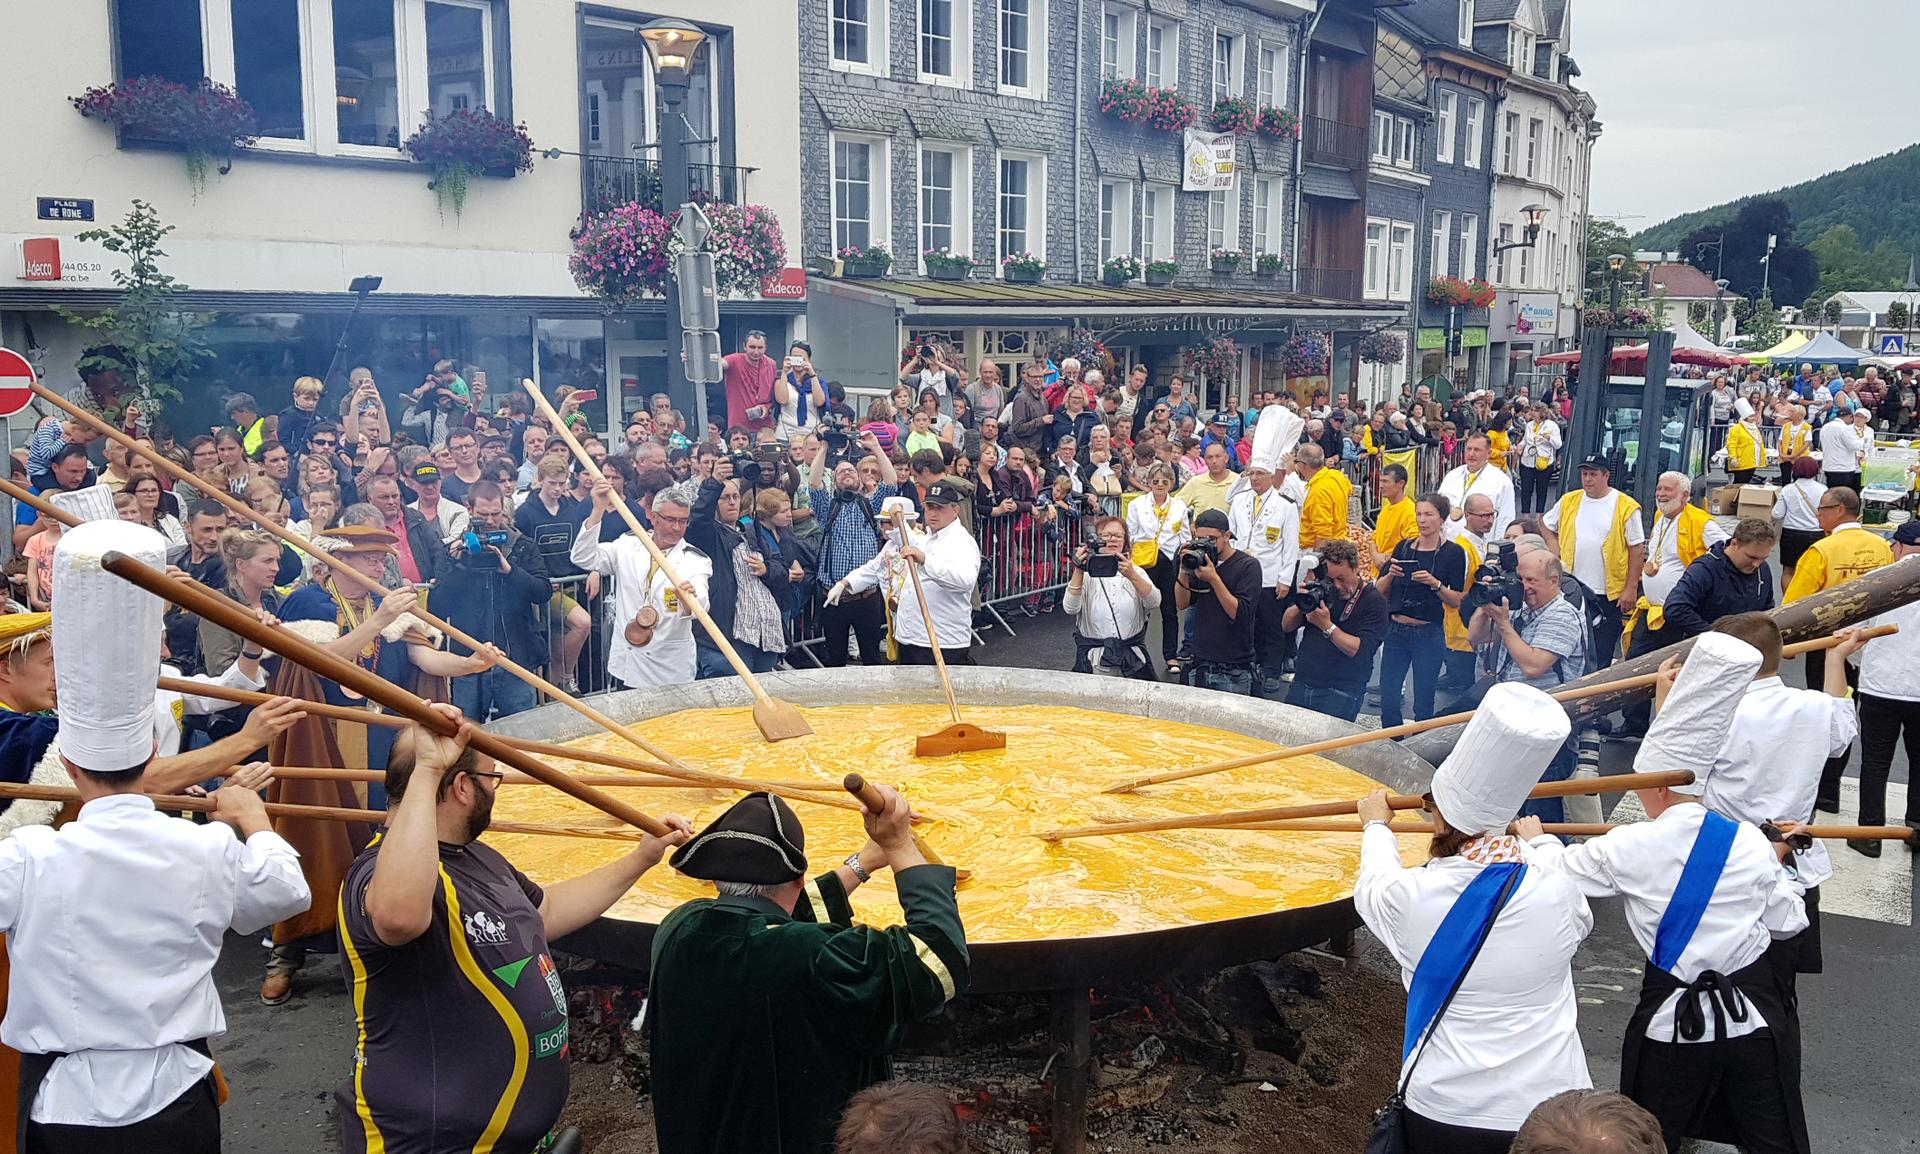 Members of the worldwide fraternity of the omelette prepare a traditional giant omelette